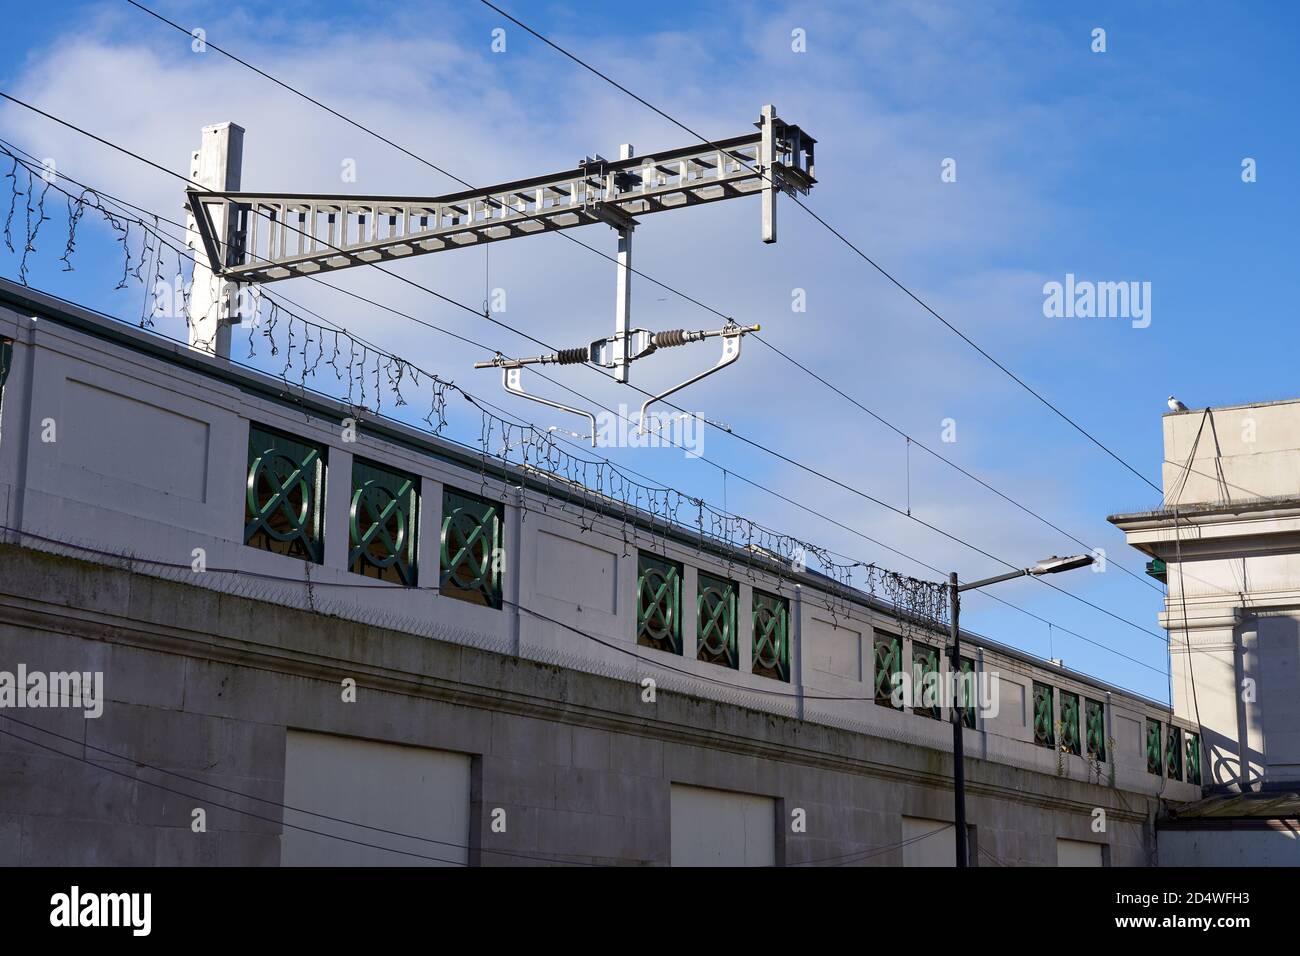 Railway electrification system, Great Western Railway, Cardiff, South Wales Stock Photo